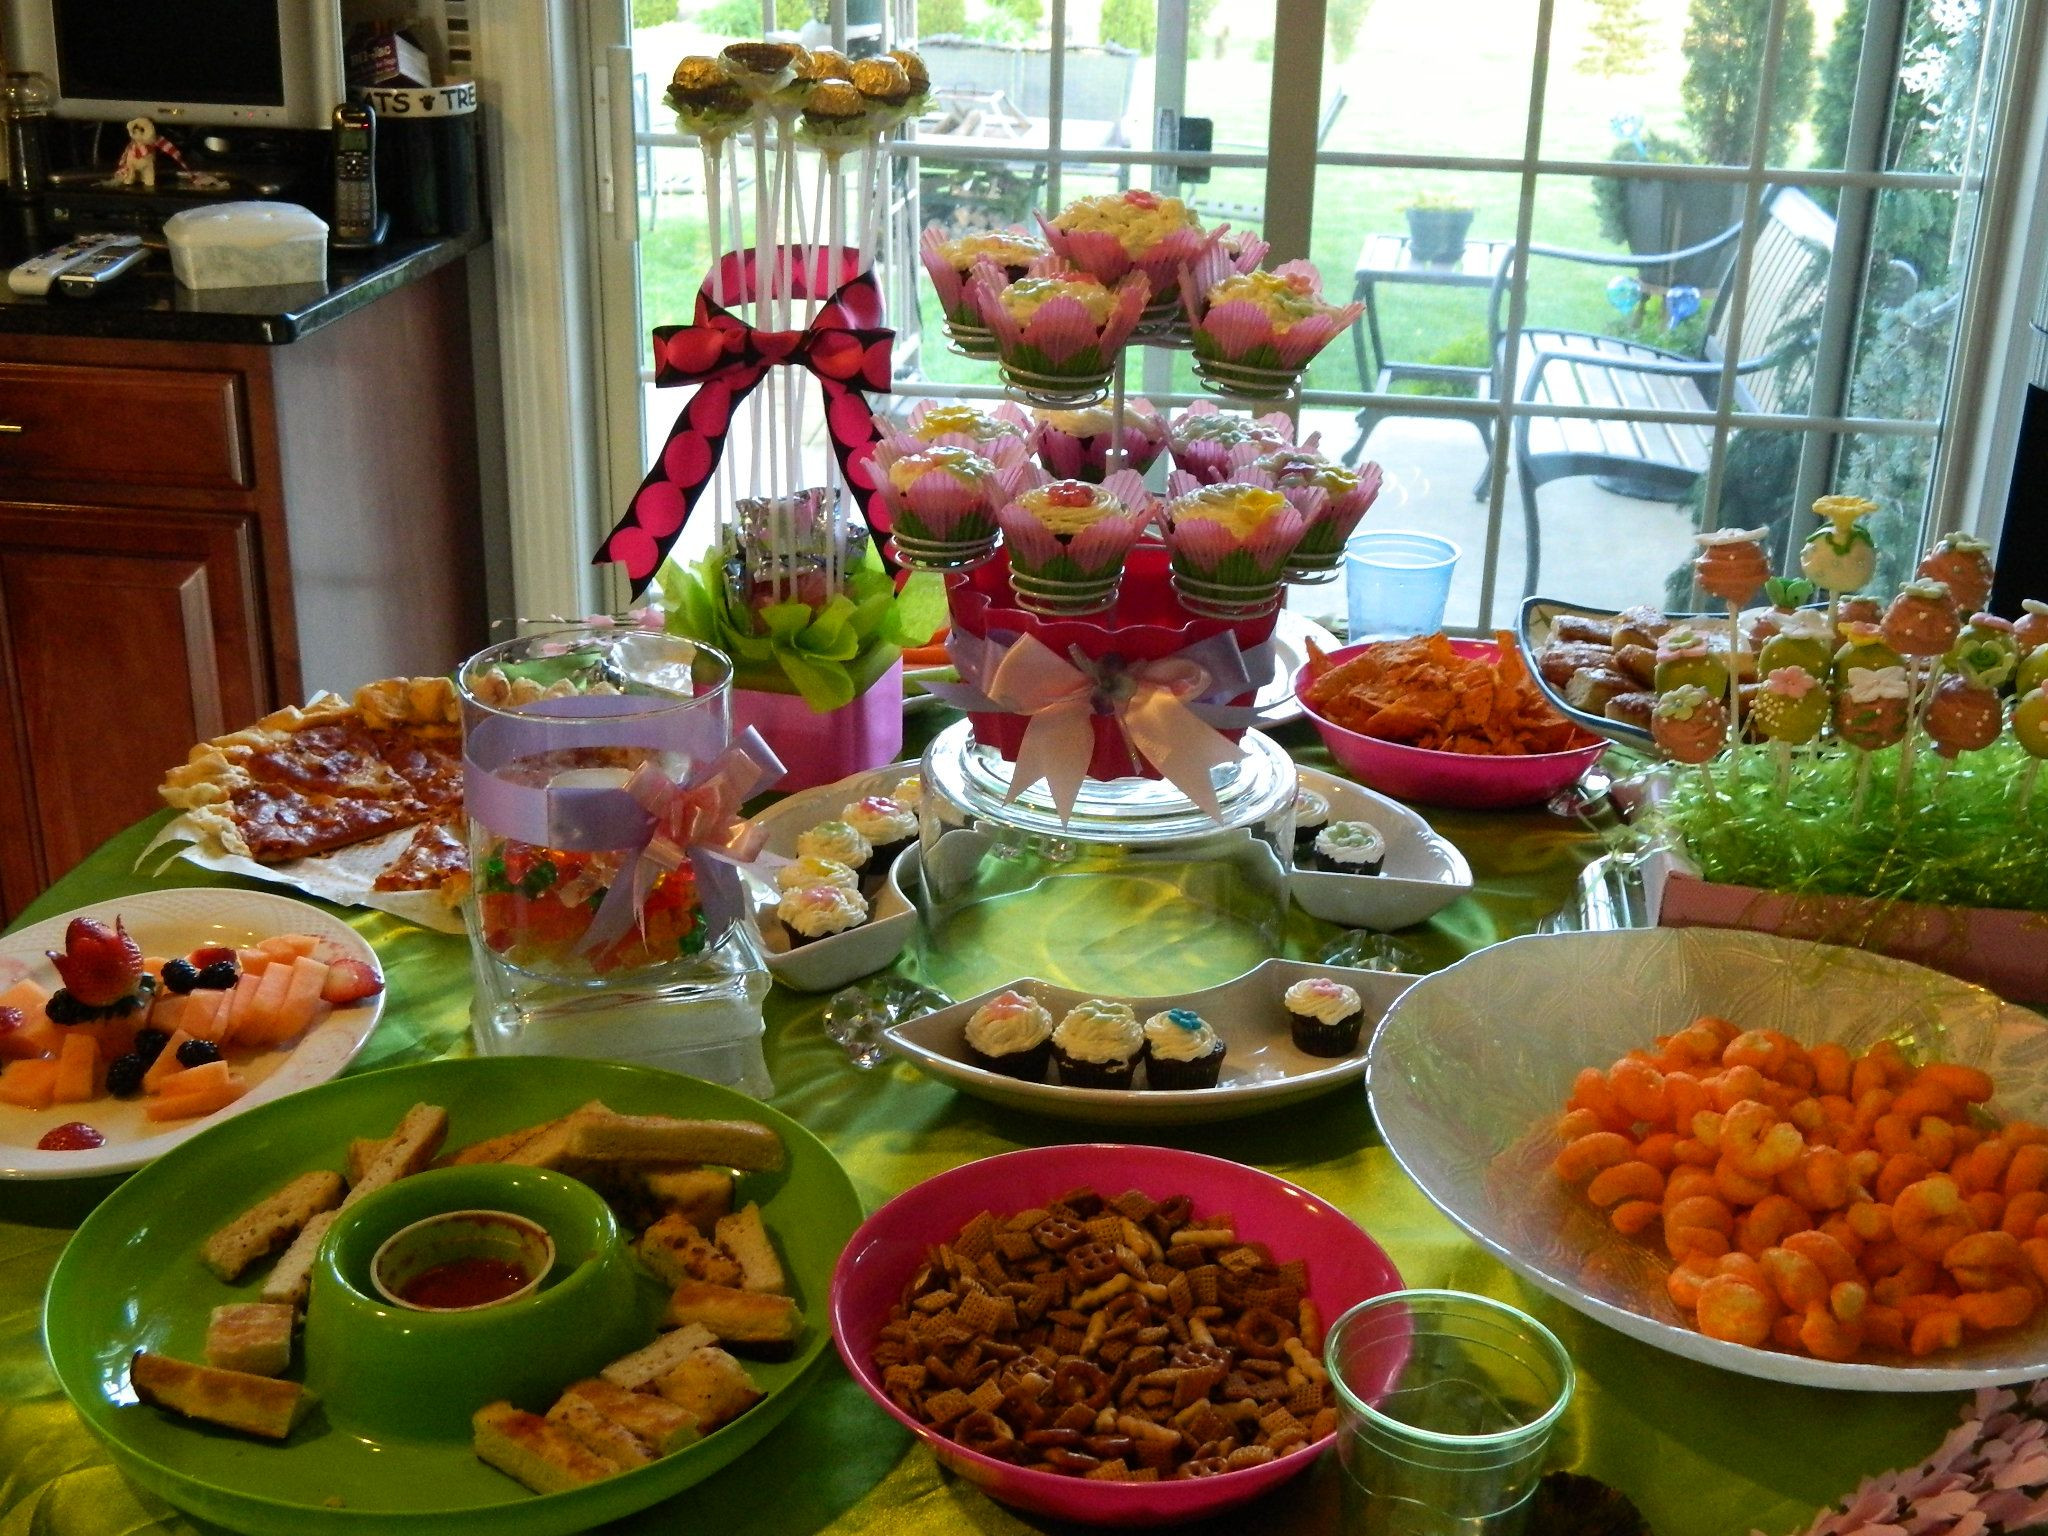 24-of-the-best-ideas-for-16th-birthday-party-food-ideas-home-family